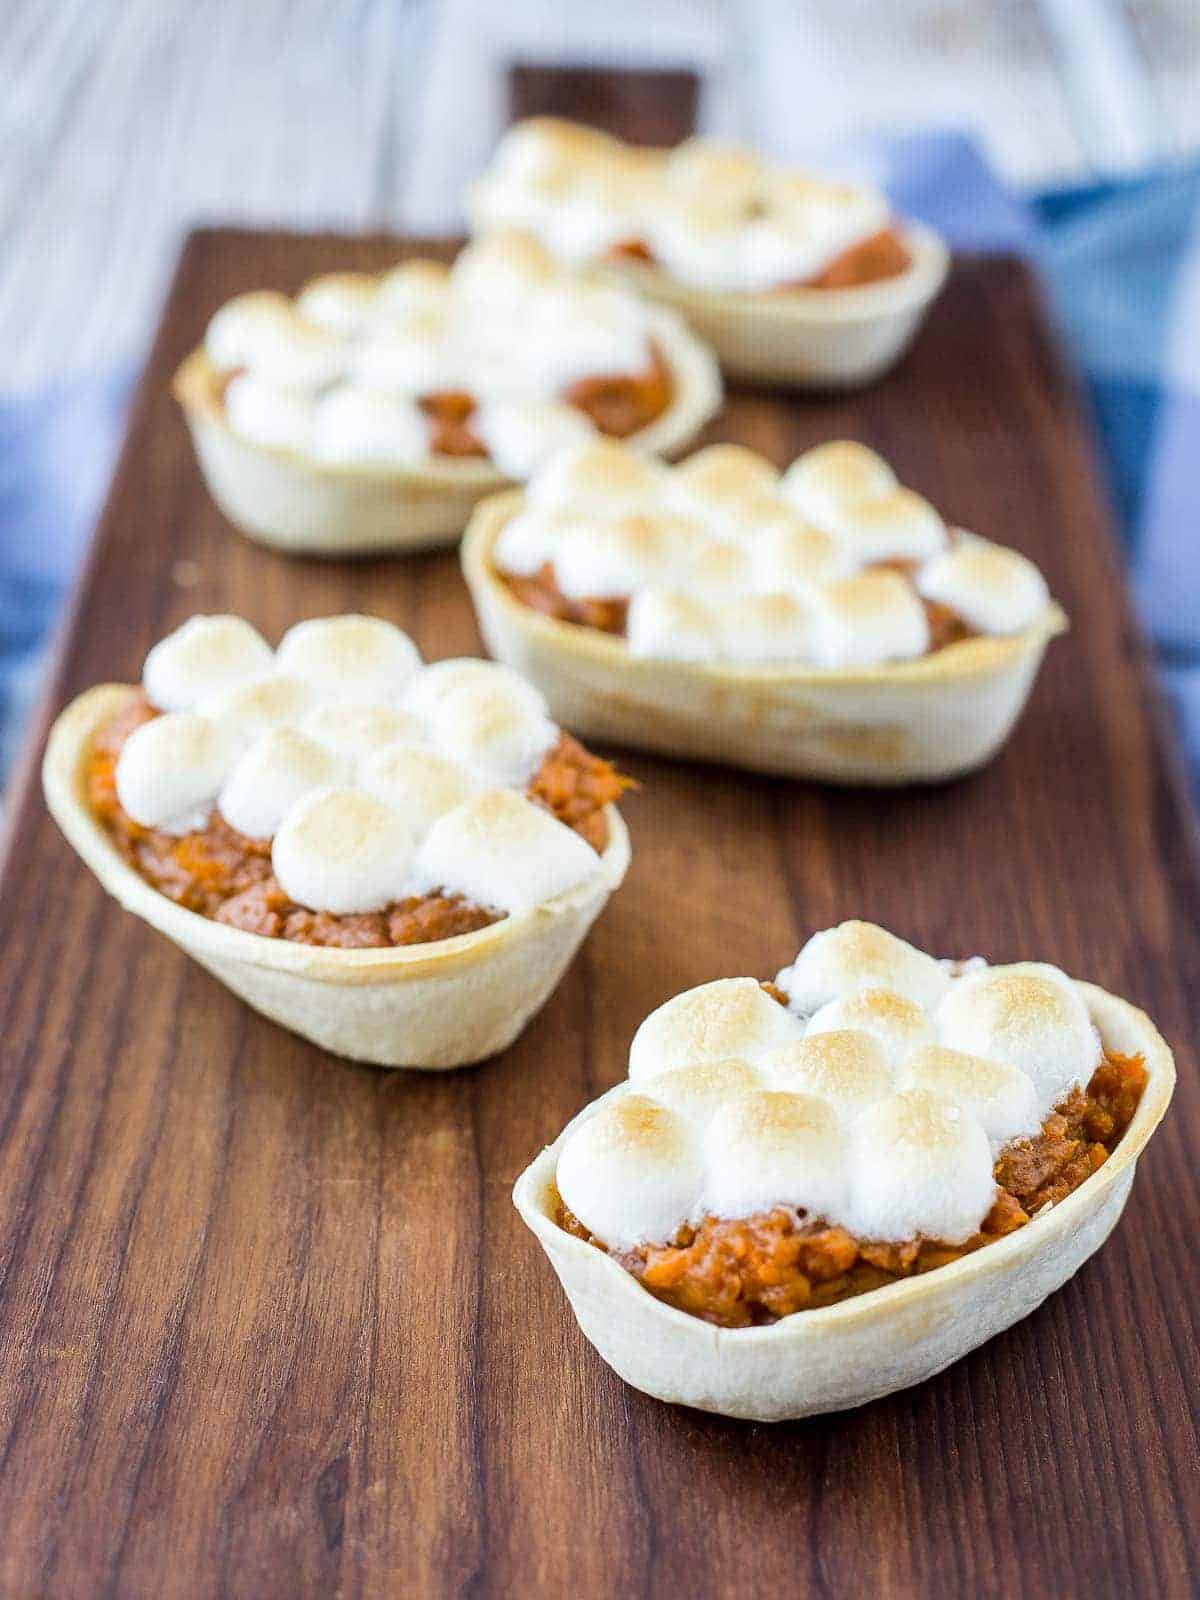 Five mini boats filled with sweet potato, topped with marshmallow, arranged on a long brown board.